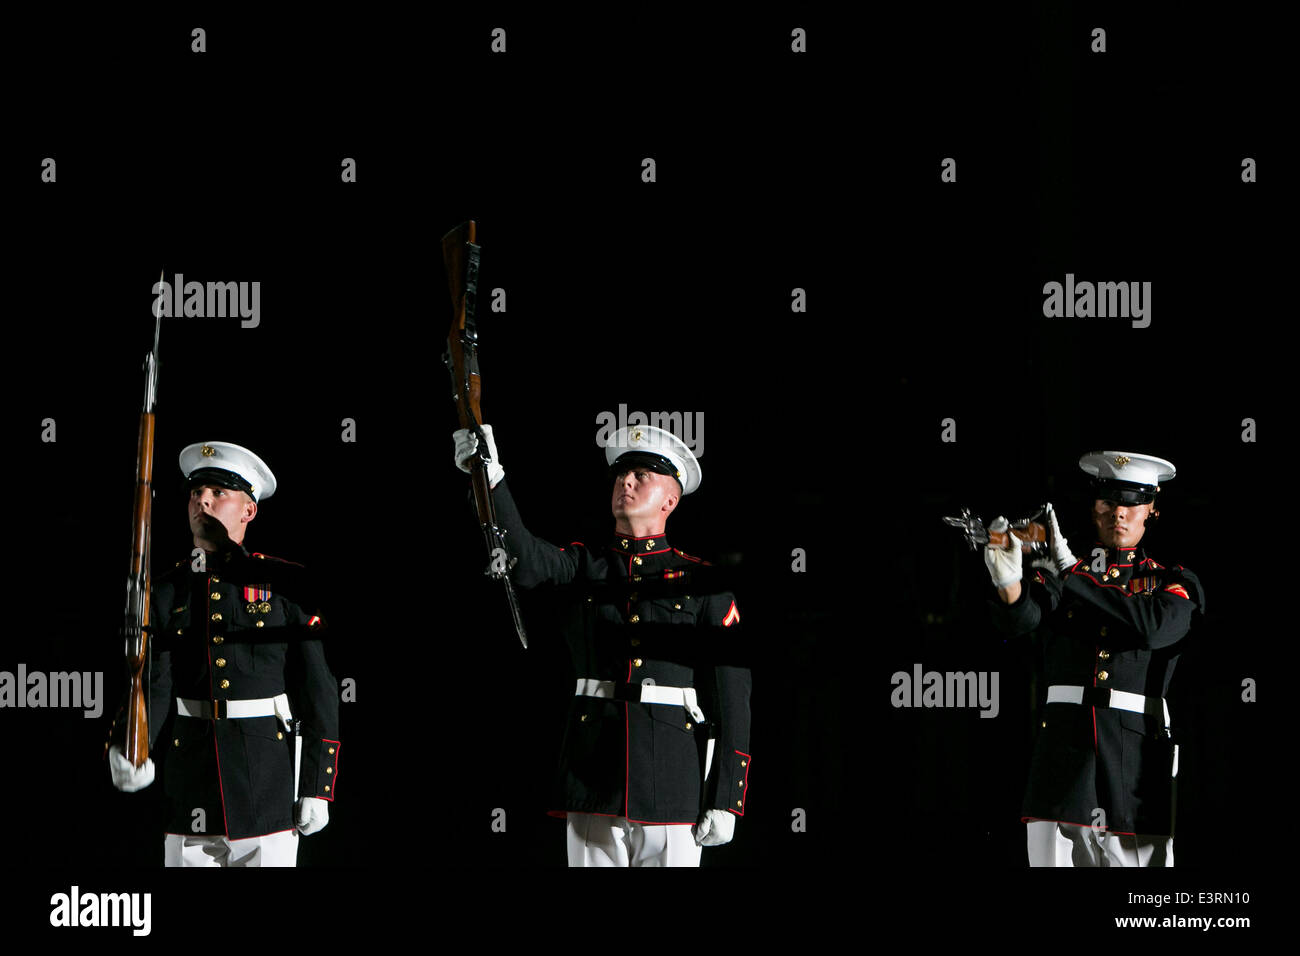 Washington, DC. 27th June, 2014. The Marine Corps Silent Drill Platoon performs during The Marine Barracks Washington, DC Evening Parade in Washington, DC, on Friday, June 27, 2014. Credit: Kristoffer Tripplaar/Pool via CNP/dpa/Alamy Live News Stock Photo